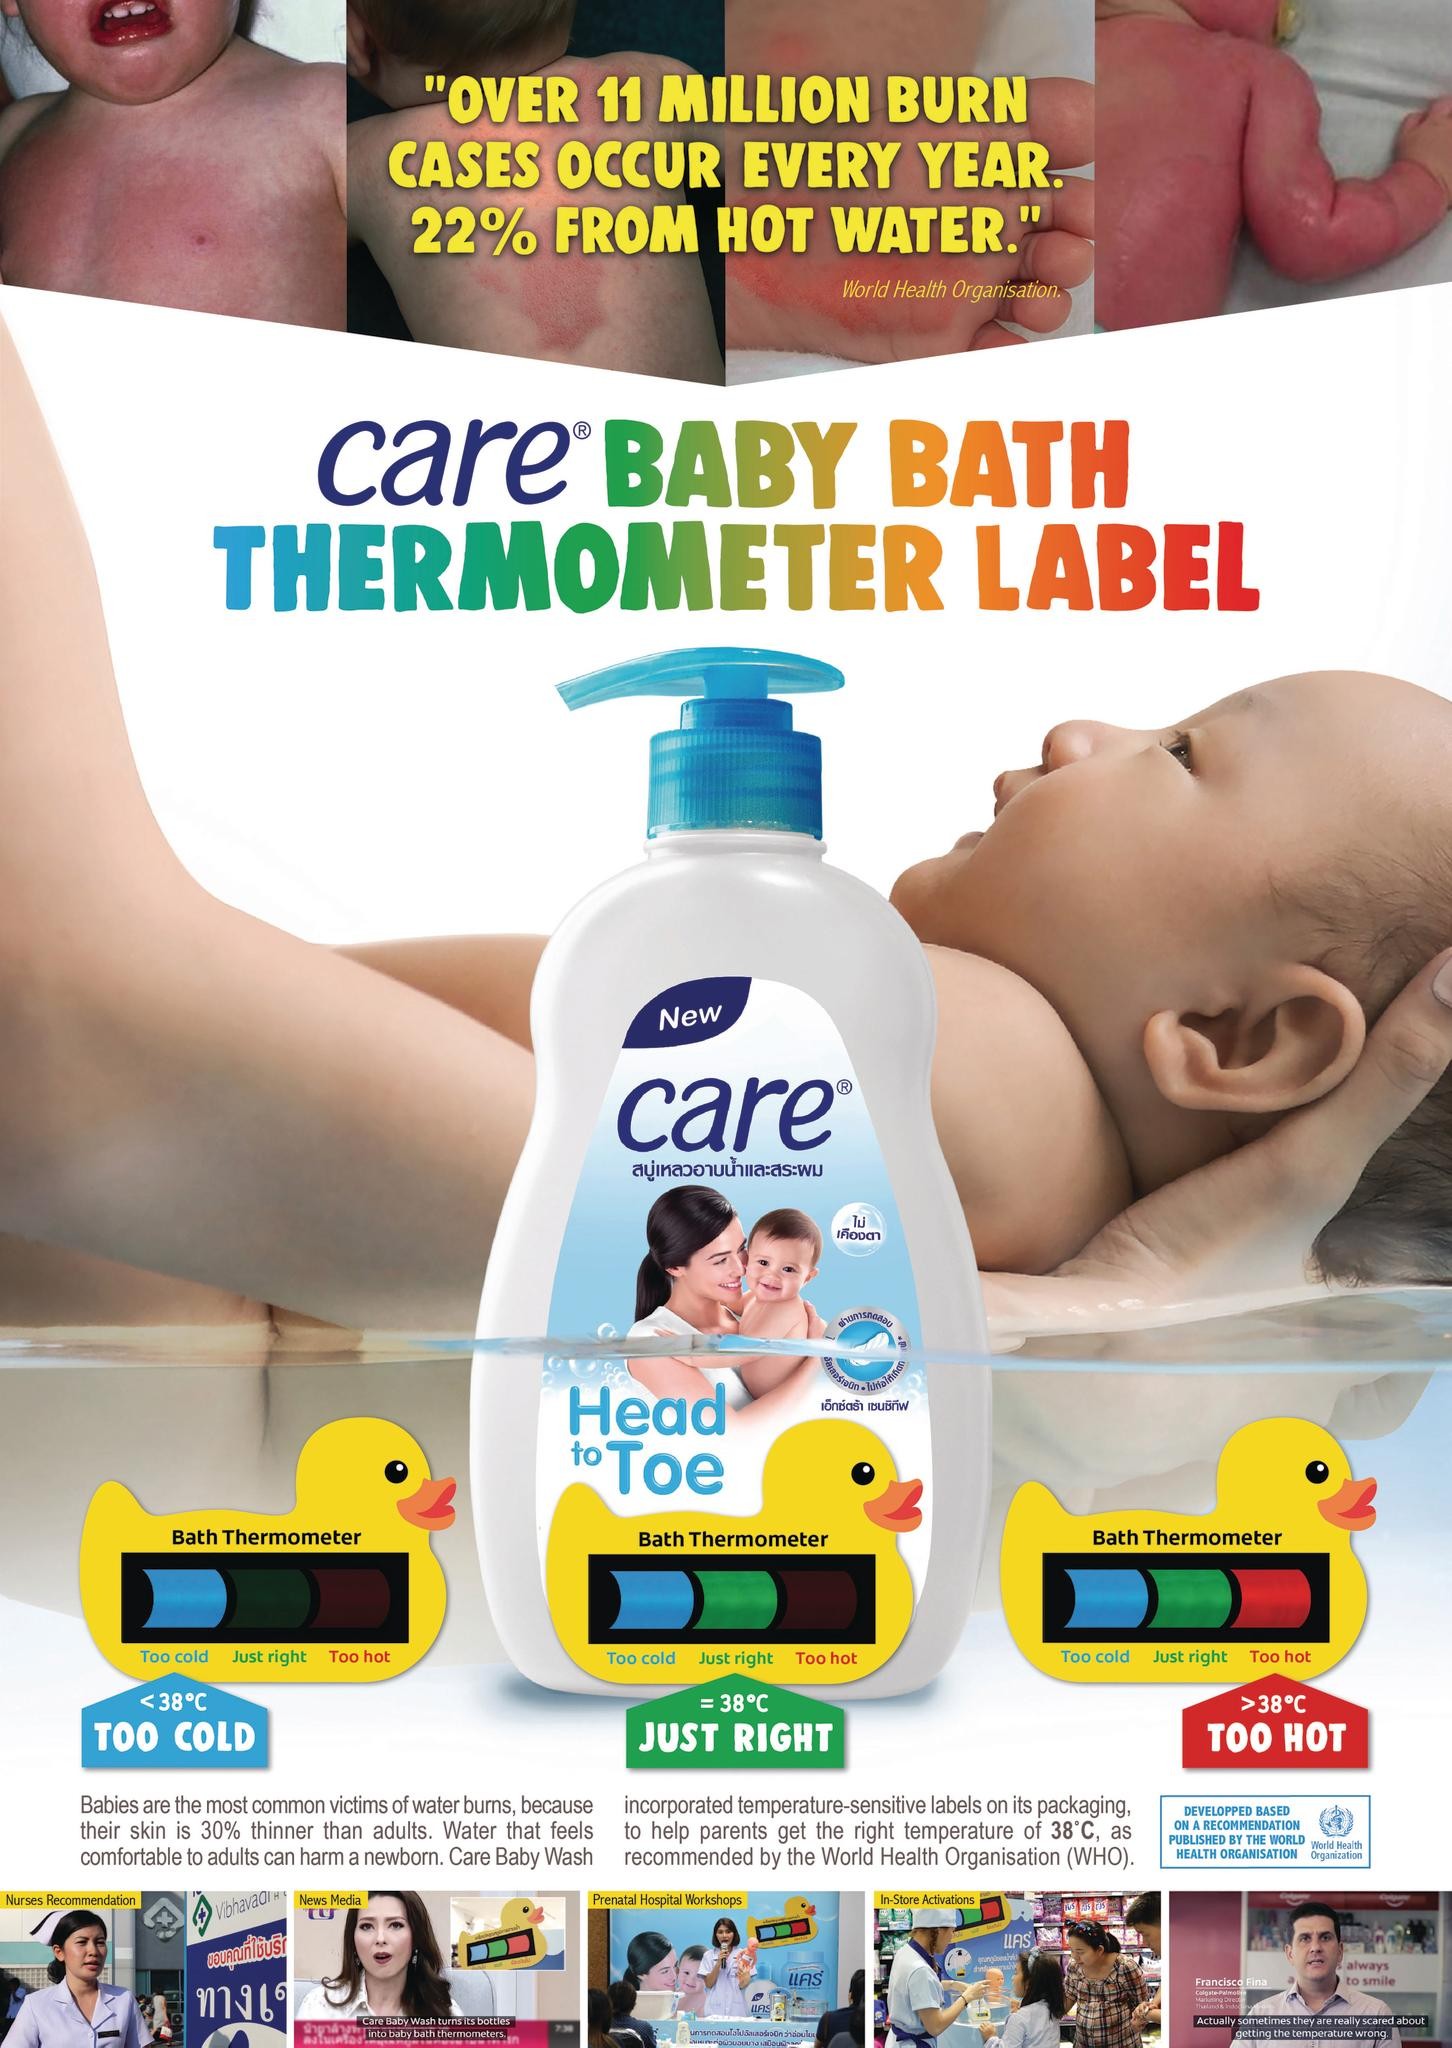 Care Baby Bath Thermometer Label